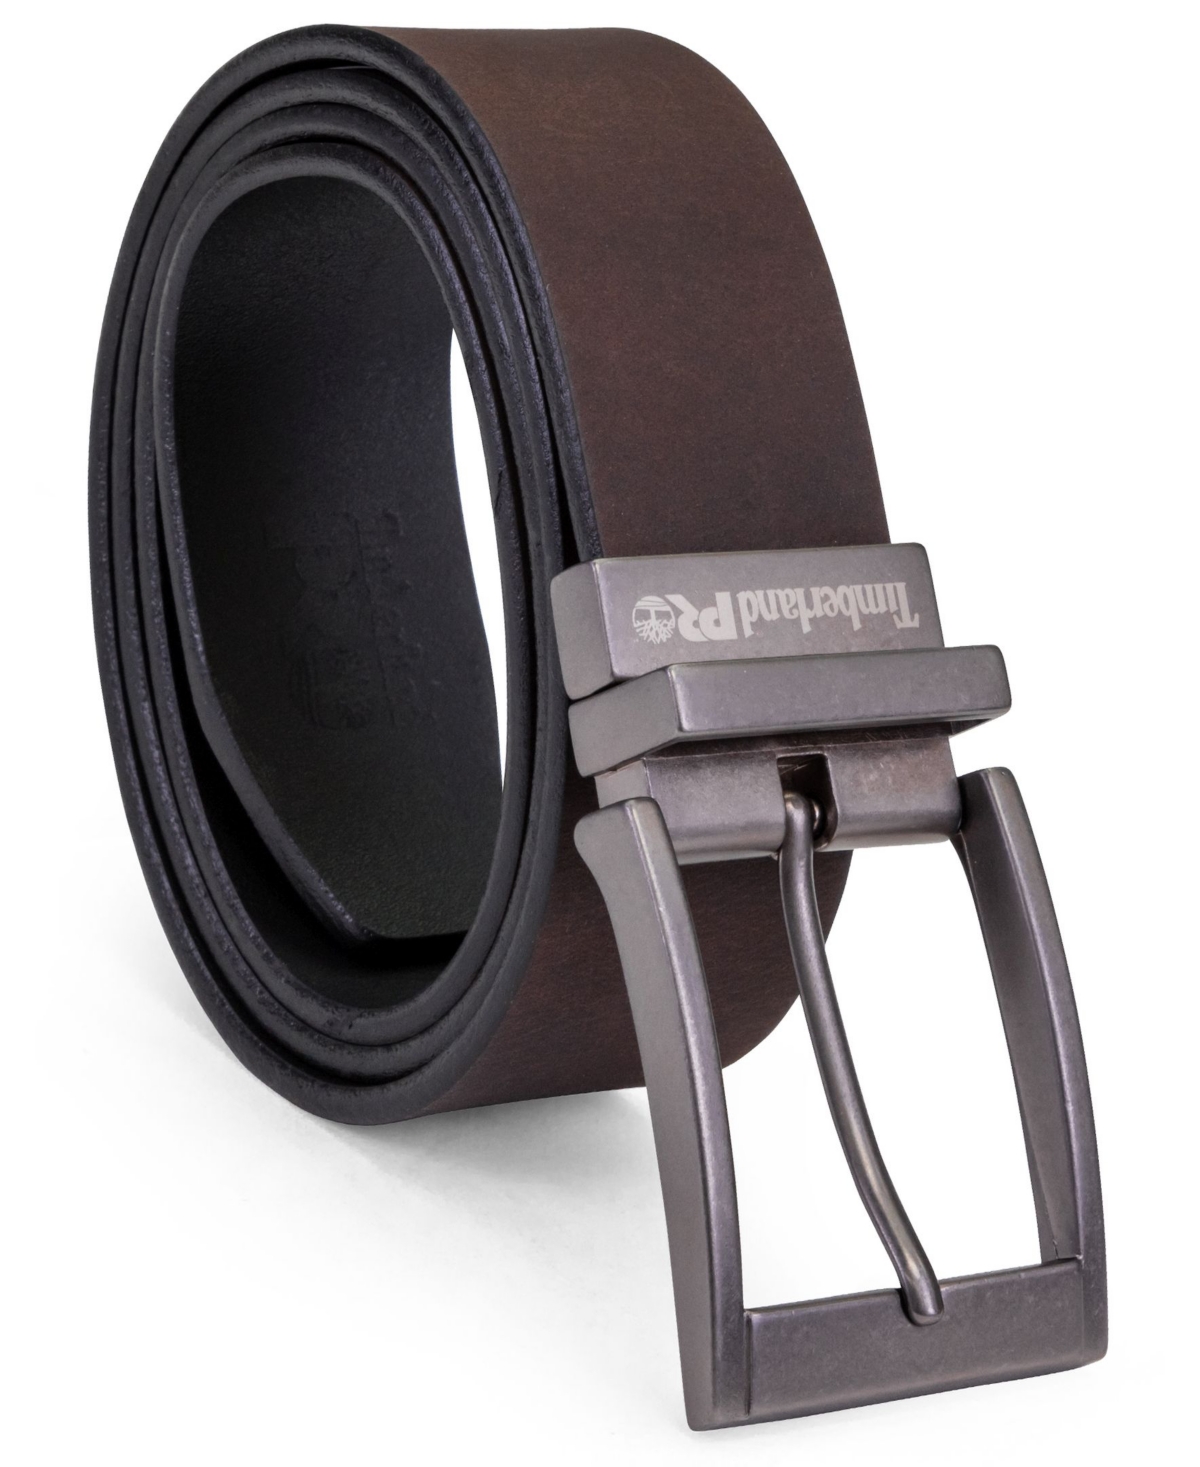 Timberland Pro 38mm Harness Reversible Belt In Brown,blac